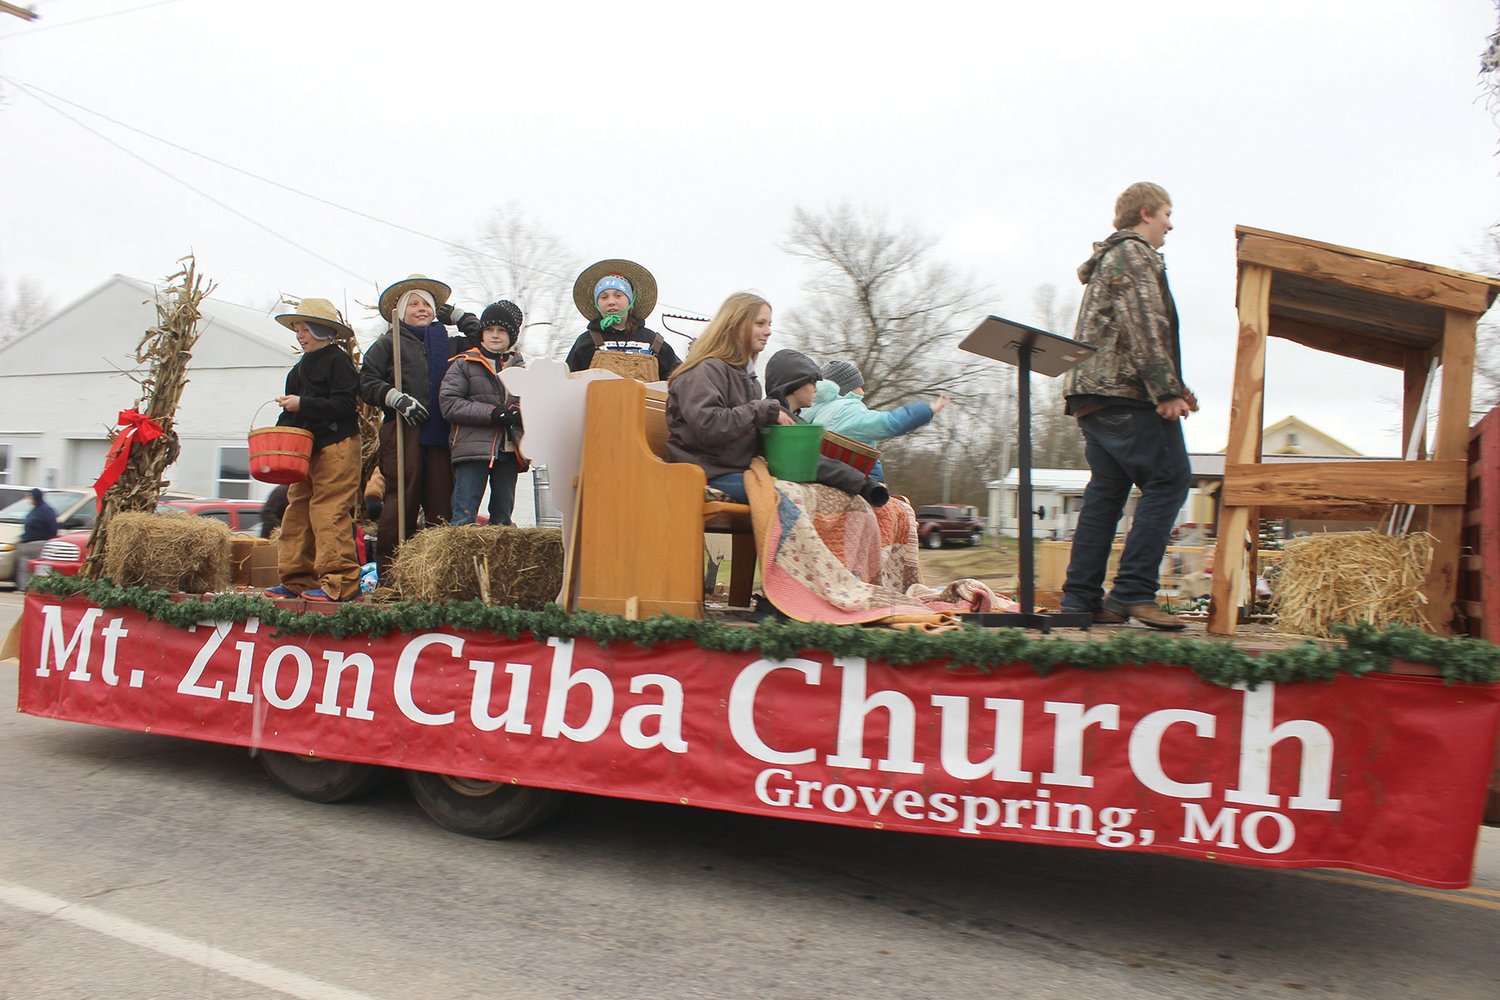 The first place float of Mt. Zion Cuba Church from Grovespring.